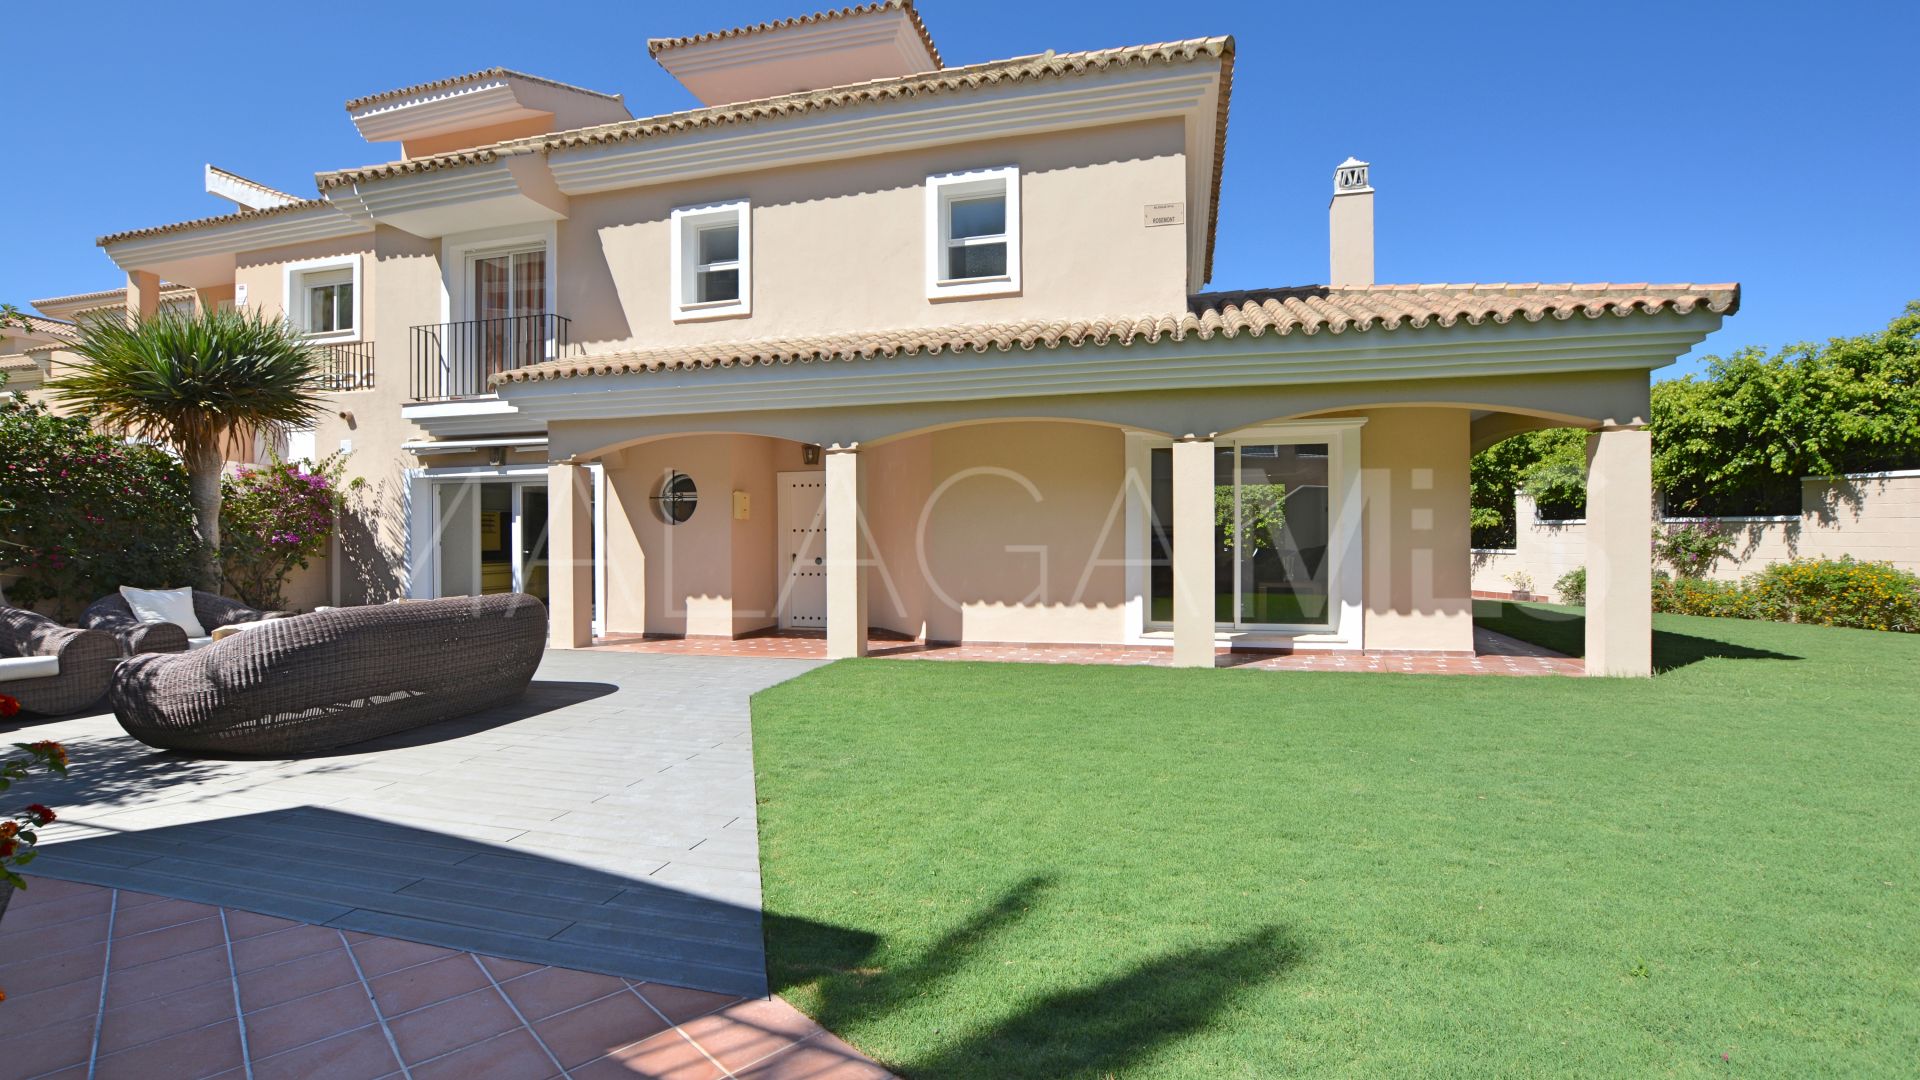 For sale villa in Duquesa Village with 5 bedrooms